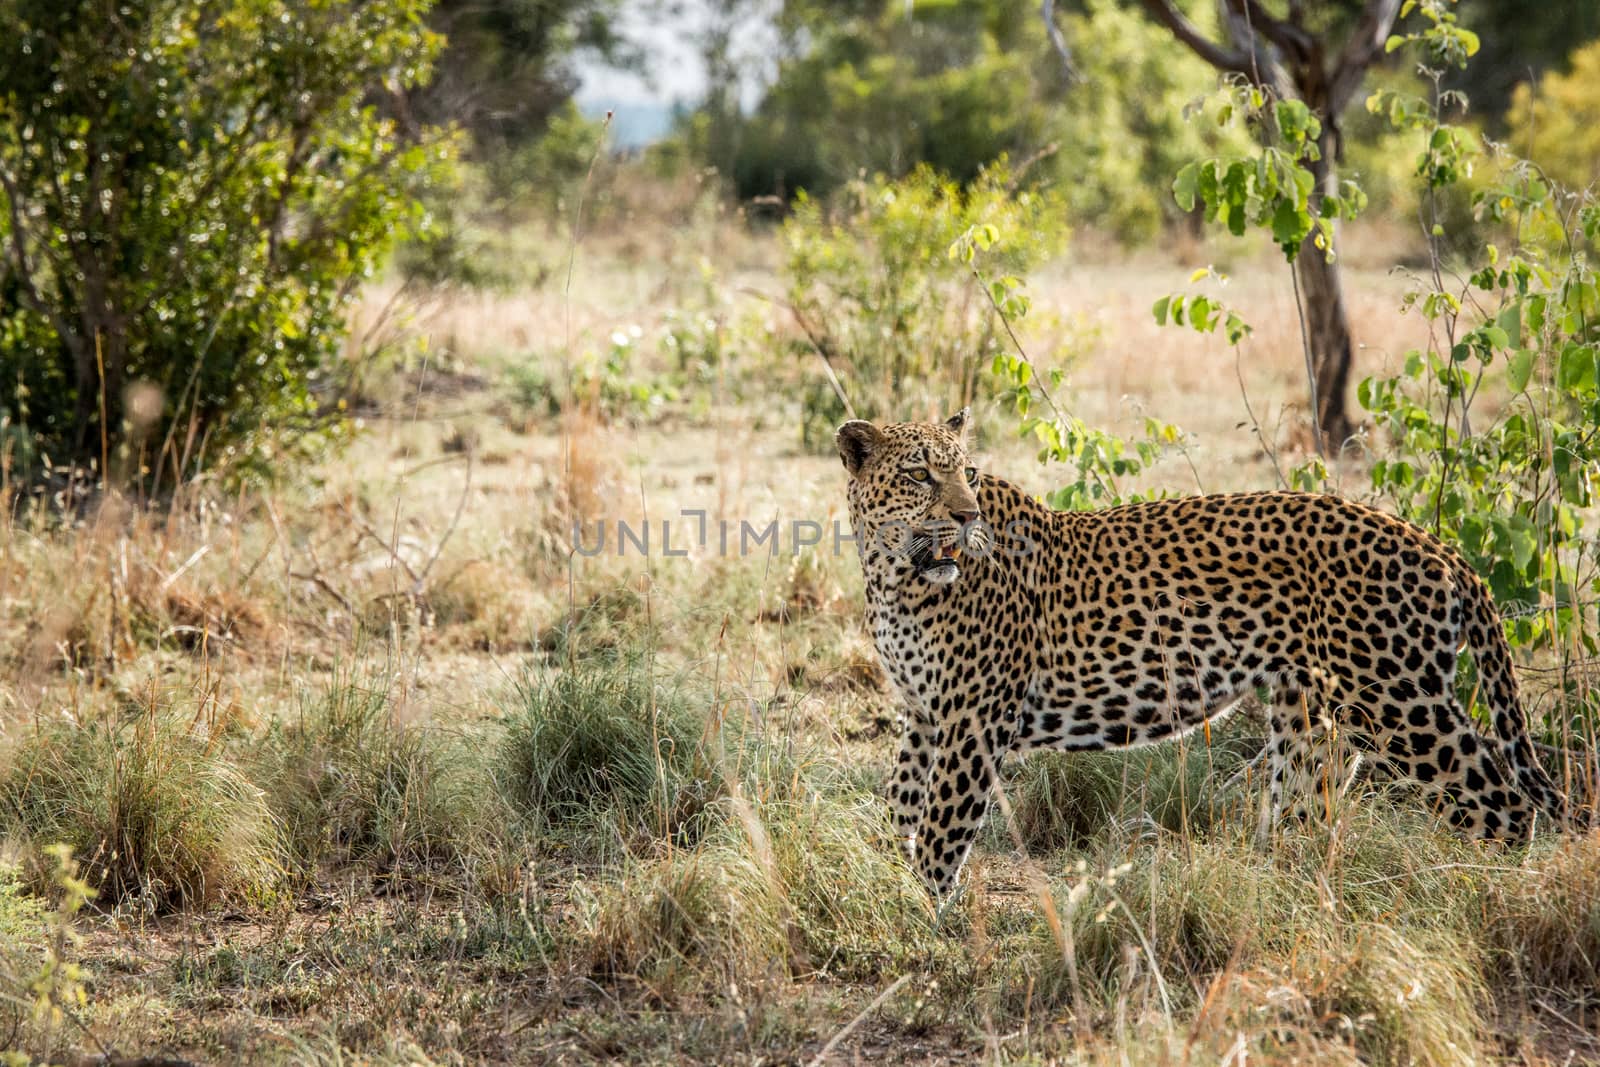 Leopard walking in the grass in the Kruger National Park, South Africa.